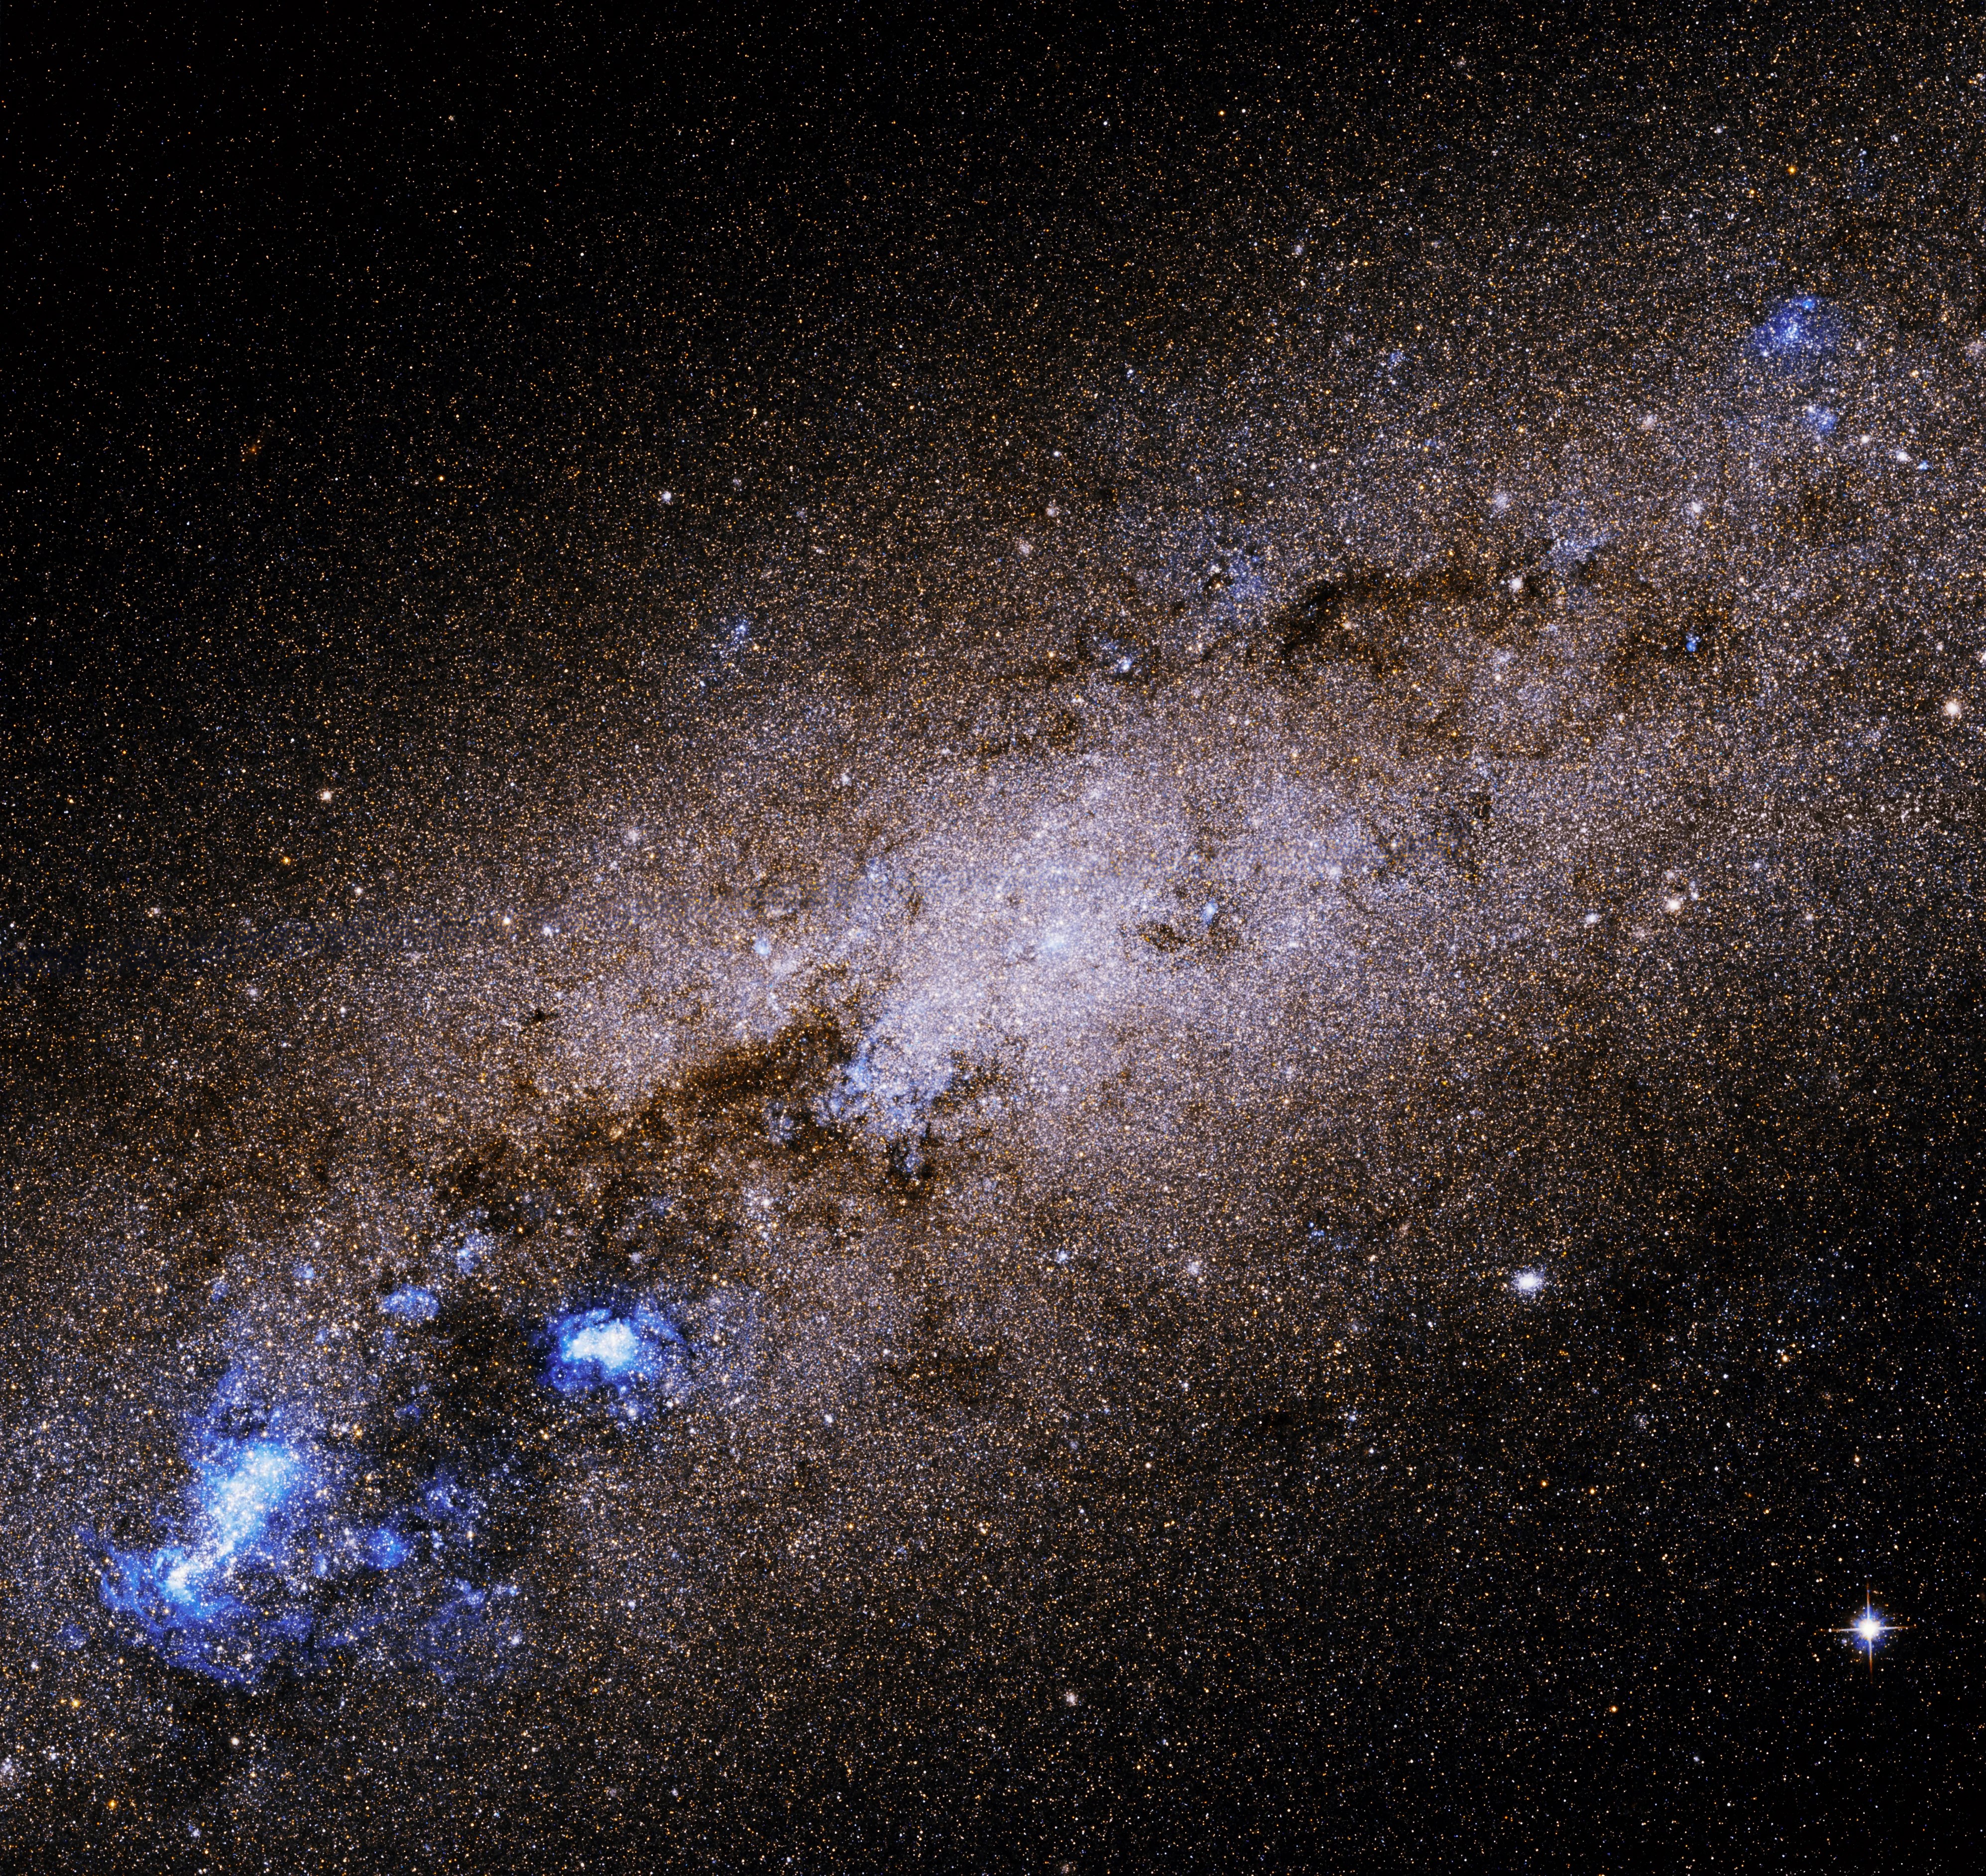 The center of the galaxy glows in a pinkish-white, and is tilted diagonally, going up-right and down-left. Black clouds of dust are visible around the center, and in the lower left corner, thick blue "clumps" of stars.